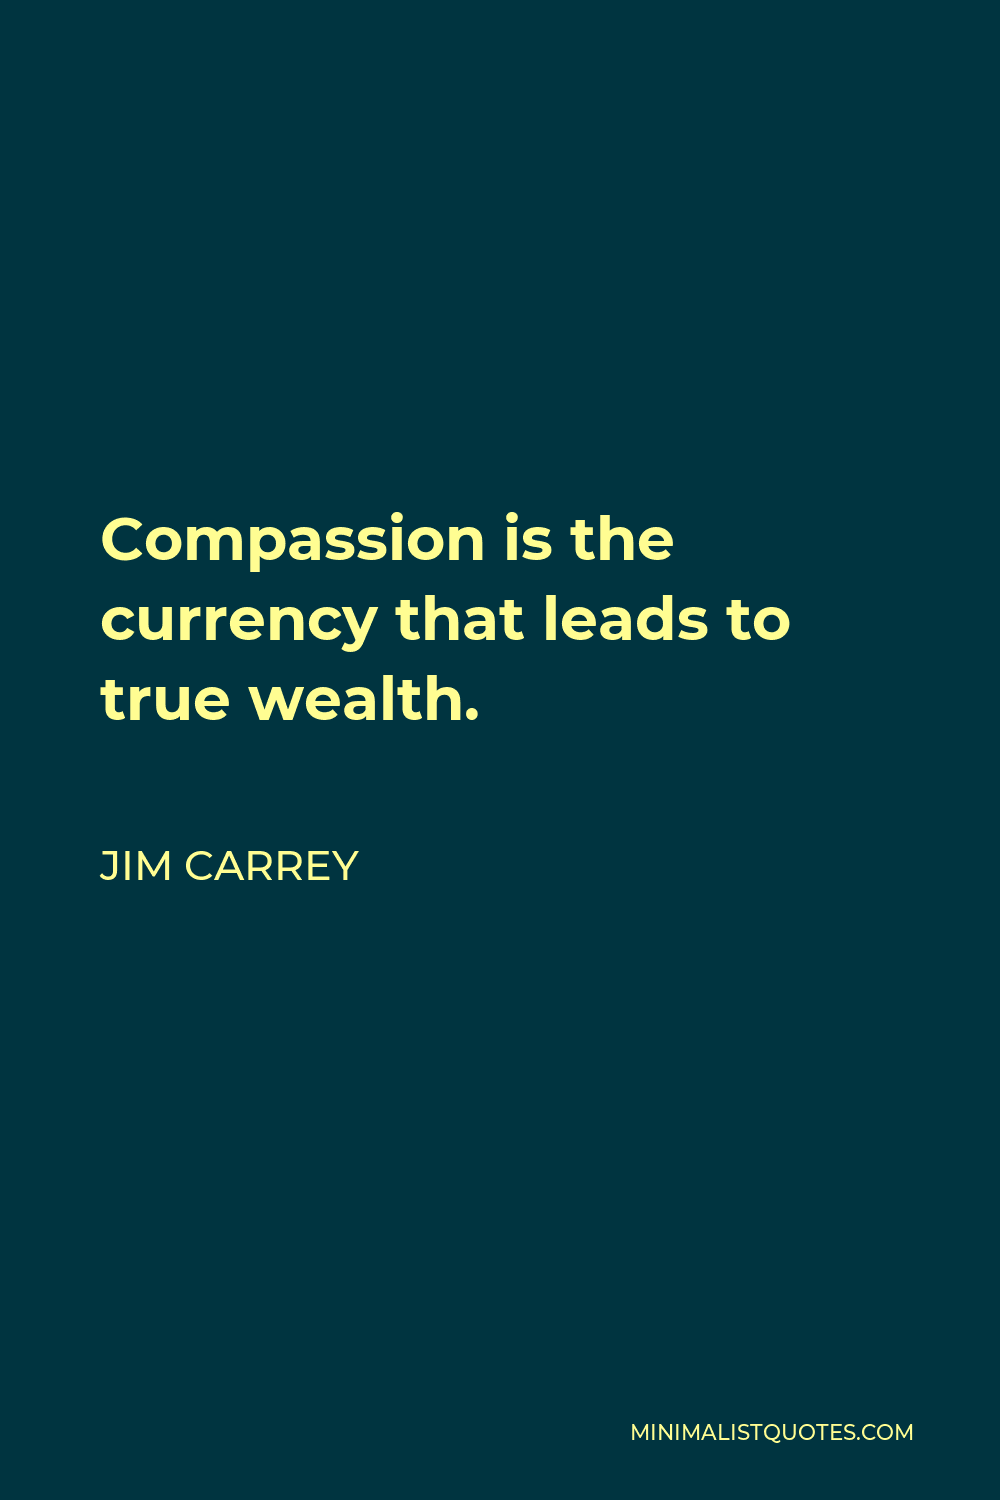 Jim Carrey Quote - Compassion is the currency that leads to true wealth.